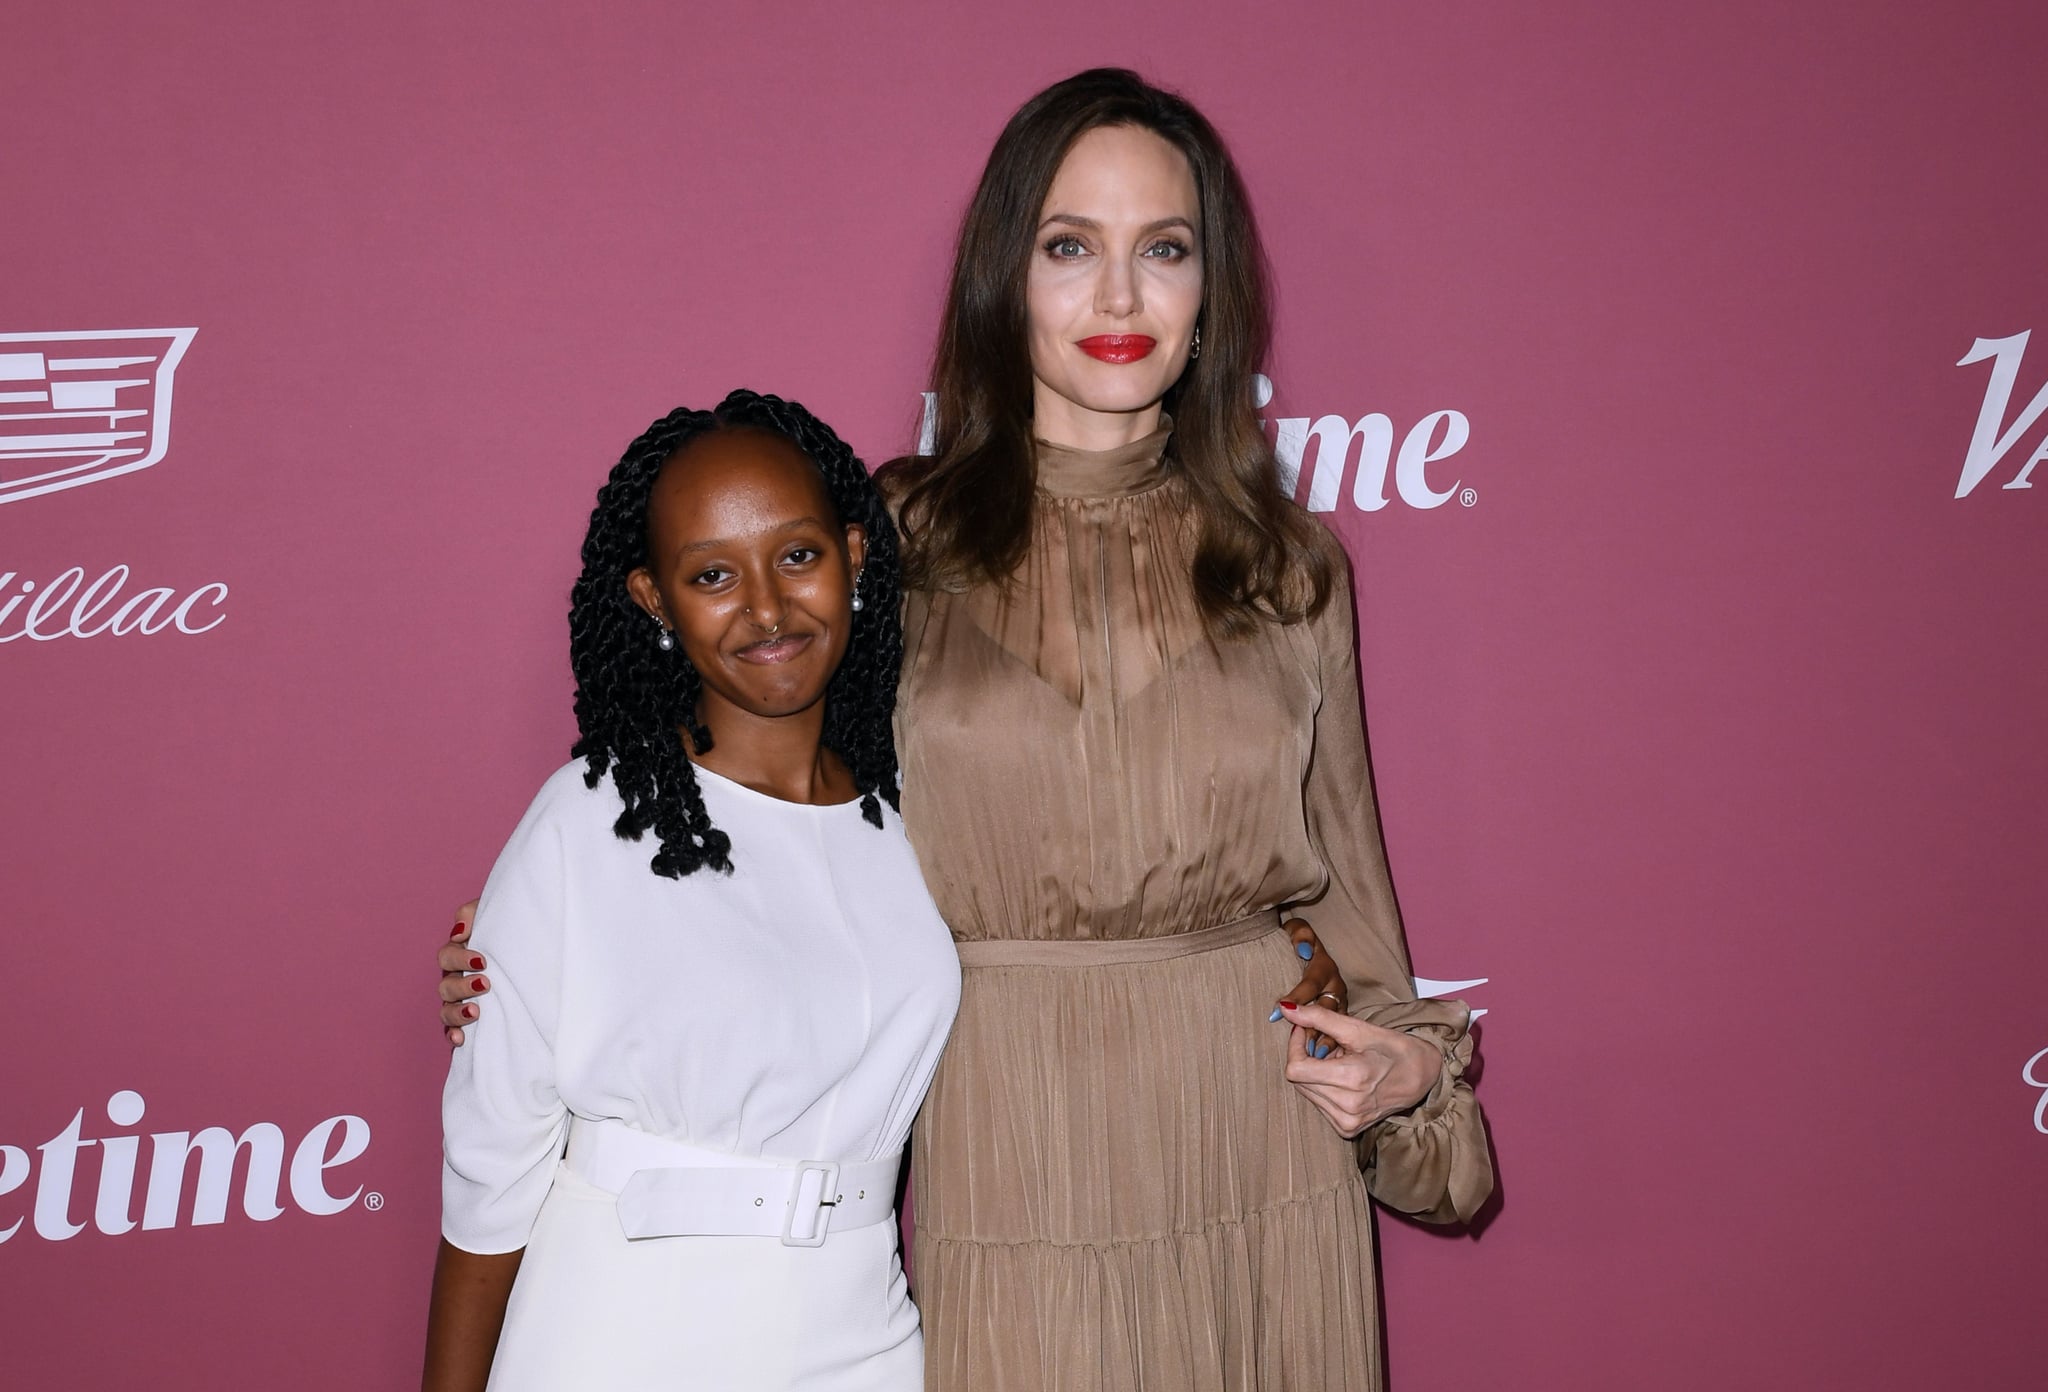 Zahara Jolie-Pitt and Angelina Jolie attend Variety's Power Of Women at Wallis Annenberg Center for the Performing Arts on September 30, 2021 in Beverly Hills, California. (Photo by Jon Kopaloff/WireImage,)